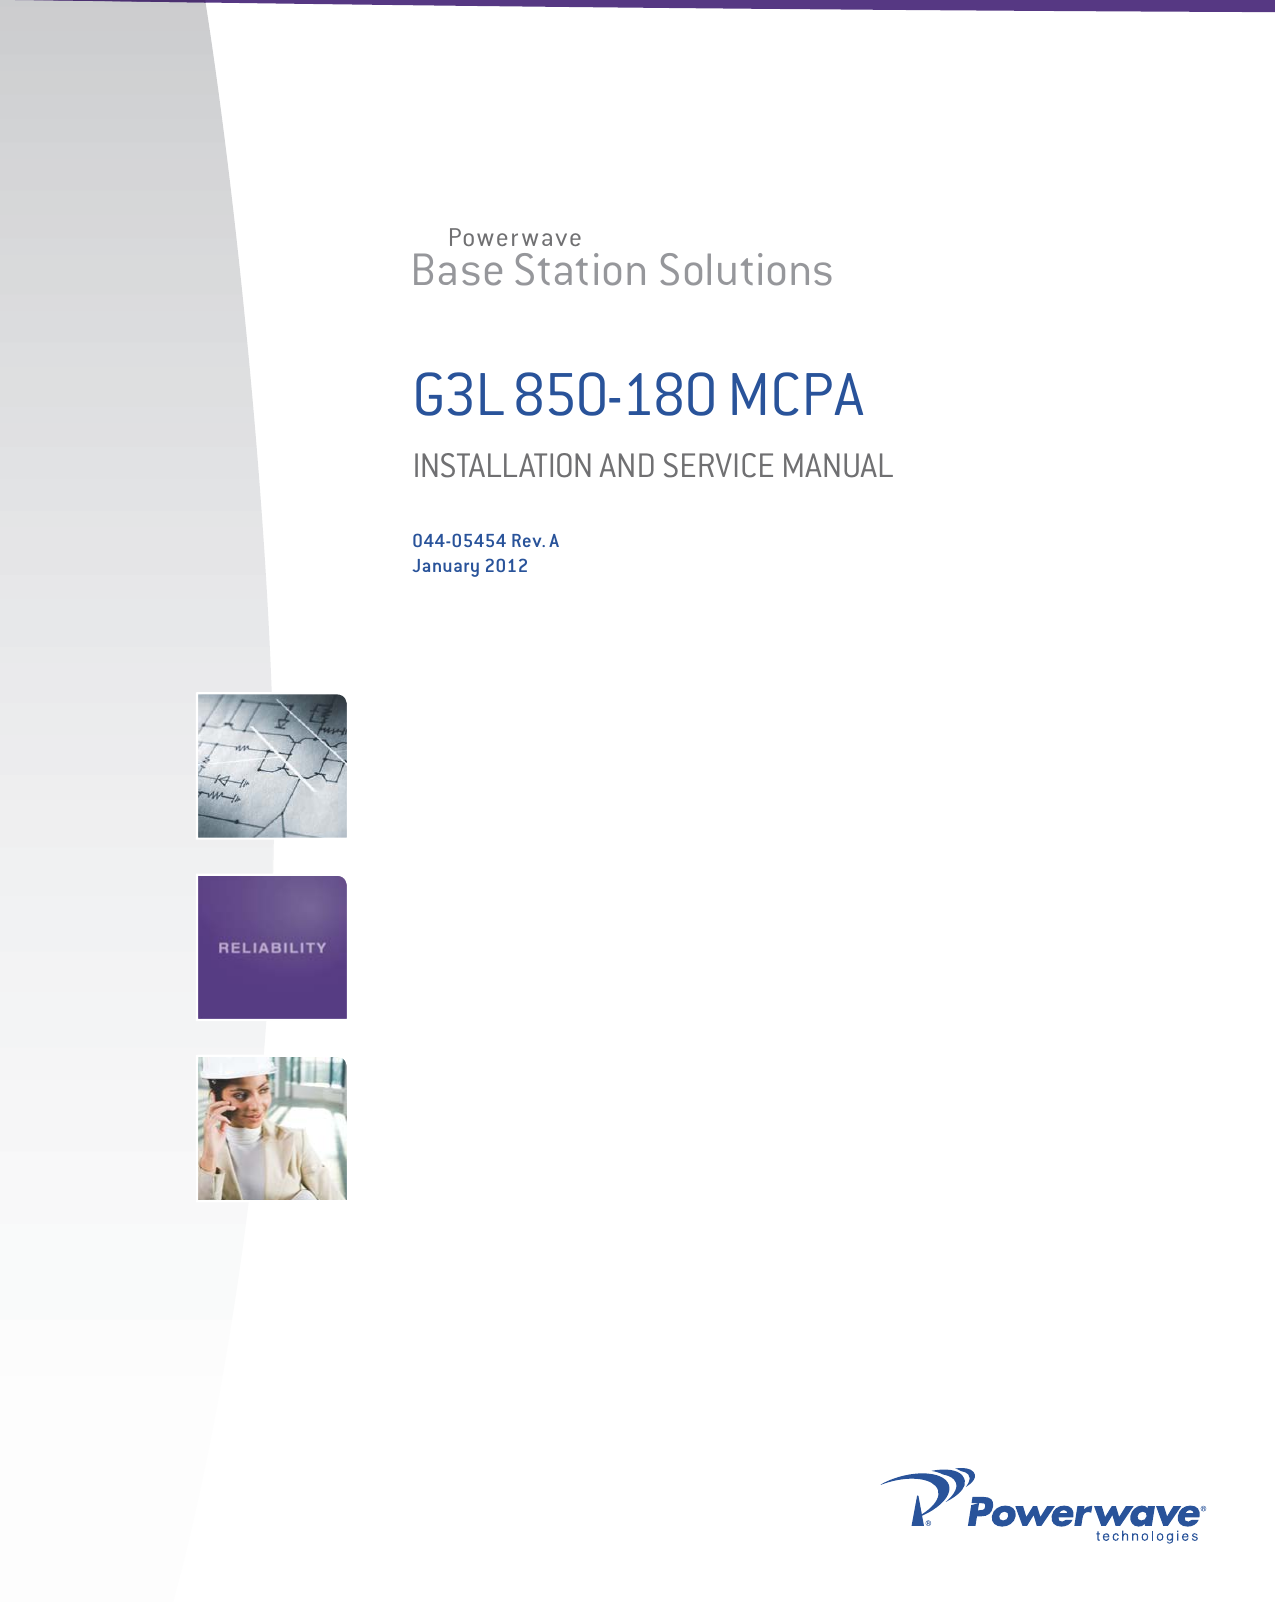 Base Station SolutionsPowerwaveG3L 850-180 MCPAINSTALLATION AND SERVICE MANUAL044-05454 Rev. AJanuary 2012       